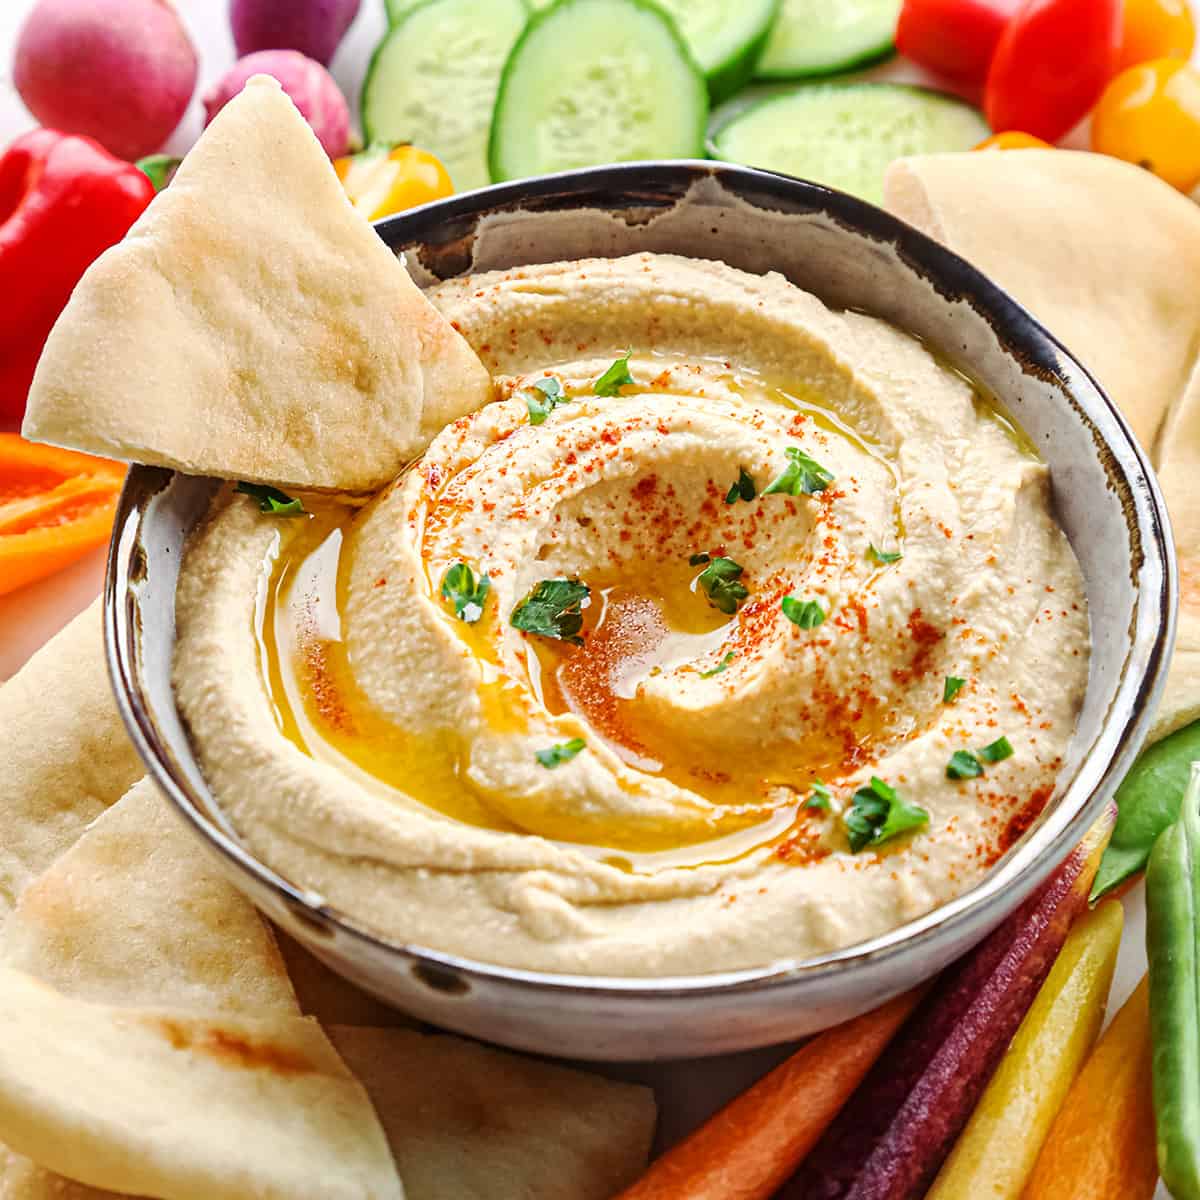 a triangle of pita bread being dipped into a bowl of Homemade Hummus topped with olive oil, paprika and parsley